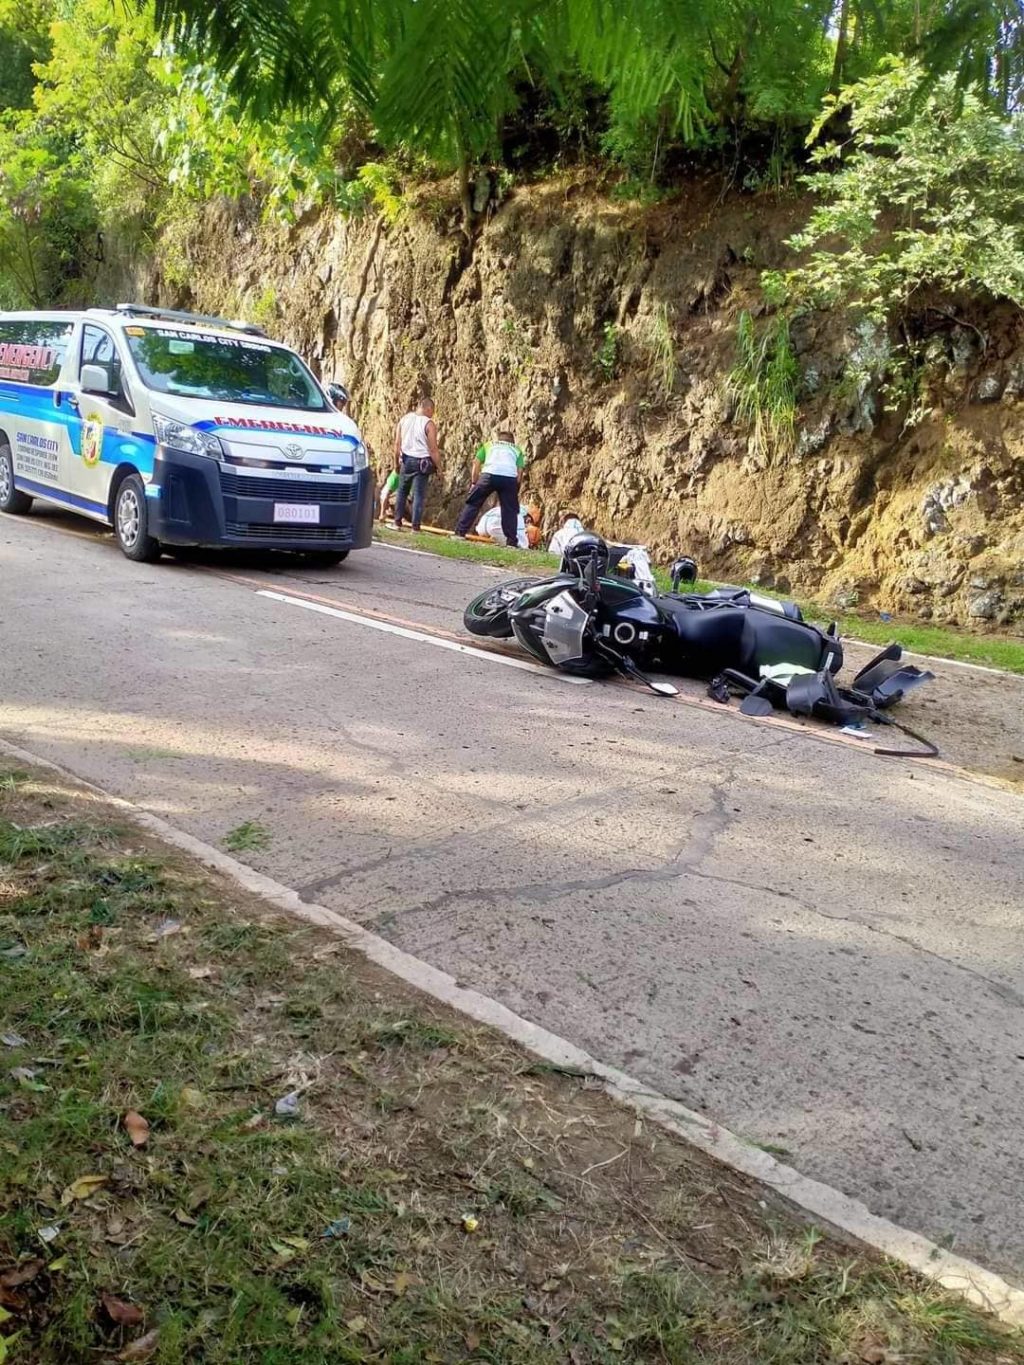 The motorcycle driven by Police Lieutenant Colonel Ruben Berbo, Guihulngan City Police chief, lies on its side after the road accident in San Carlos City in Negros Occidental. The police chief was killed in the accident. | Contributed photo via Paul Lauro